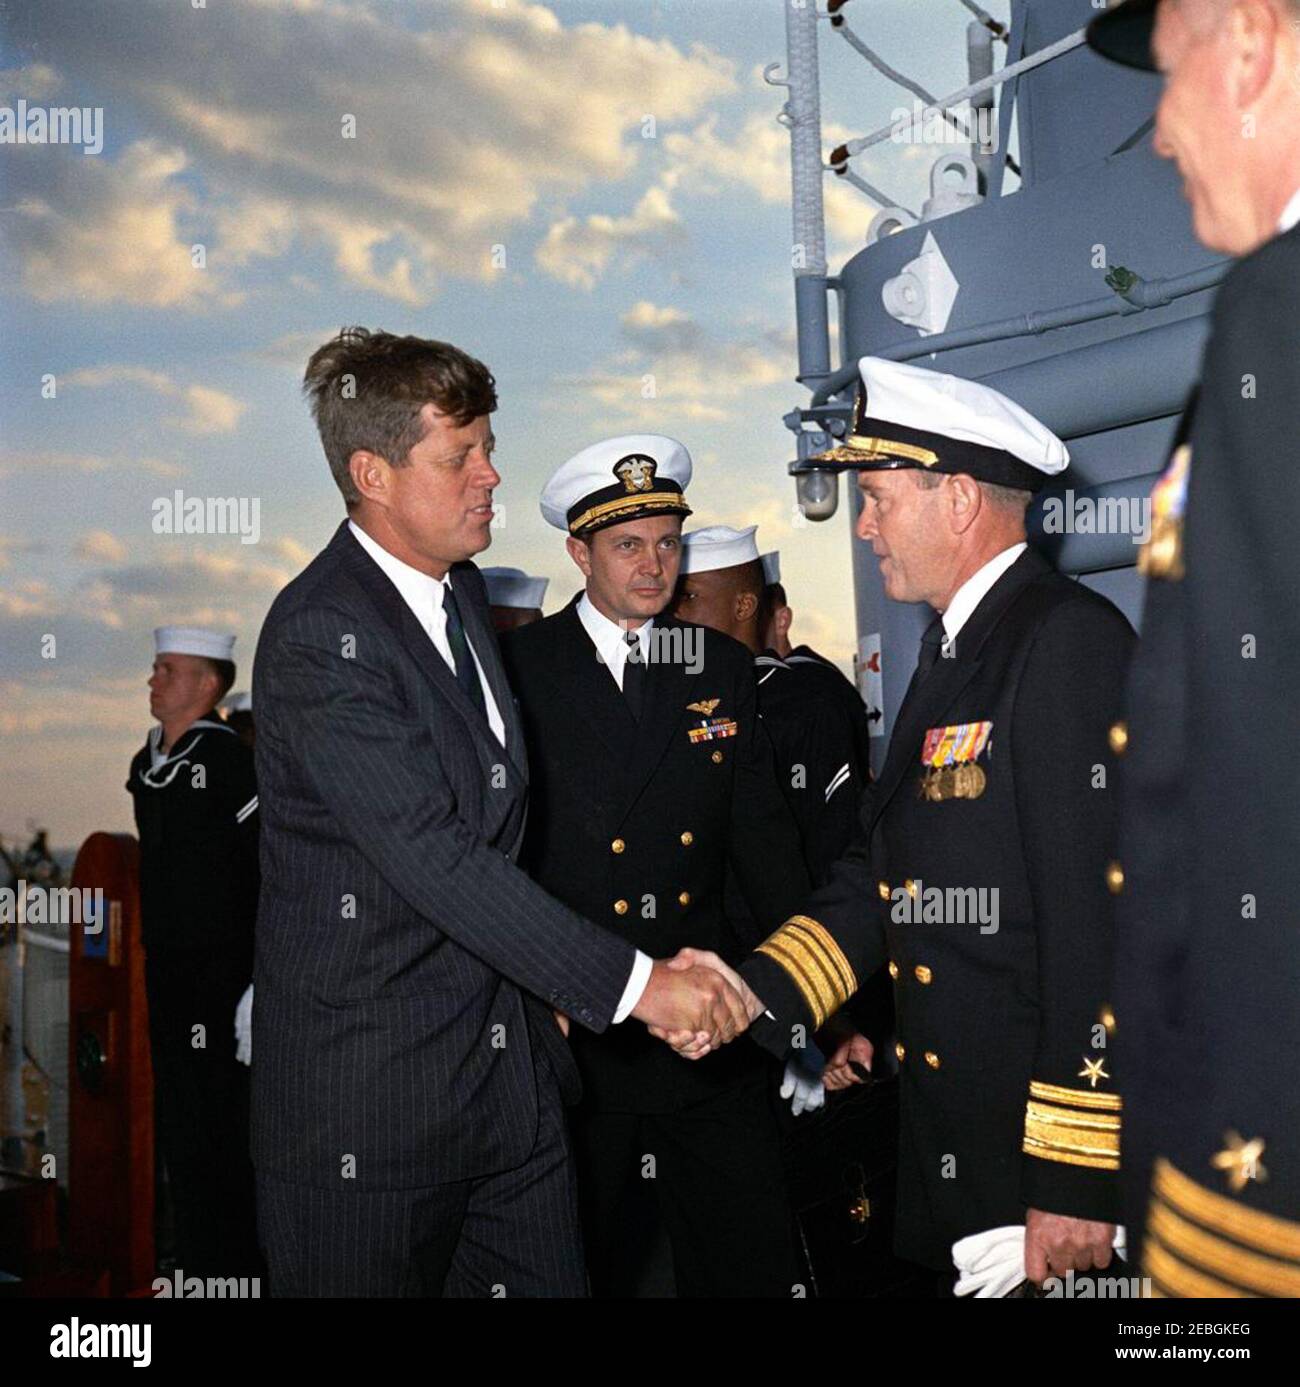 Visit to the Atlantic Fleet: President Kennedy greets SEALs, boards USS Northampton (CC-1), 5:20PM. President John F. Kennedy greets an unidentified United States Navy rear admiral upon boarding the cruiser USS Northampton (CC-1), command ship of the U.S. Atlantic Fleet, dockside at Naval Air Station, Norfolk, Virginia. Naval Aide to the President Captain Tazewell Shepard, Jr. (back center) stands behind President Kennedy. The President boarded the ship for an overnight cruise to view fleet exercises. Stock Photo